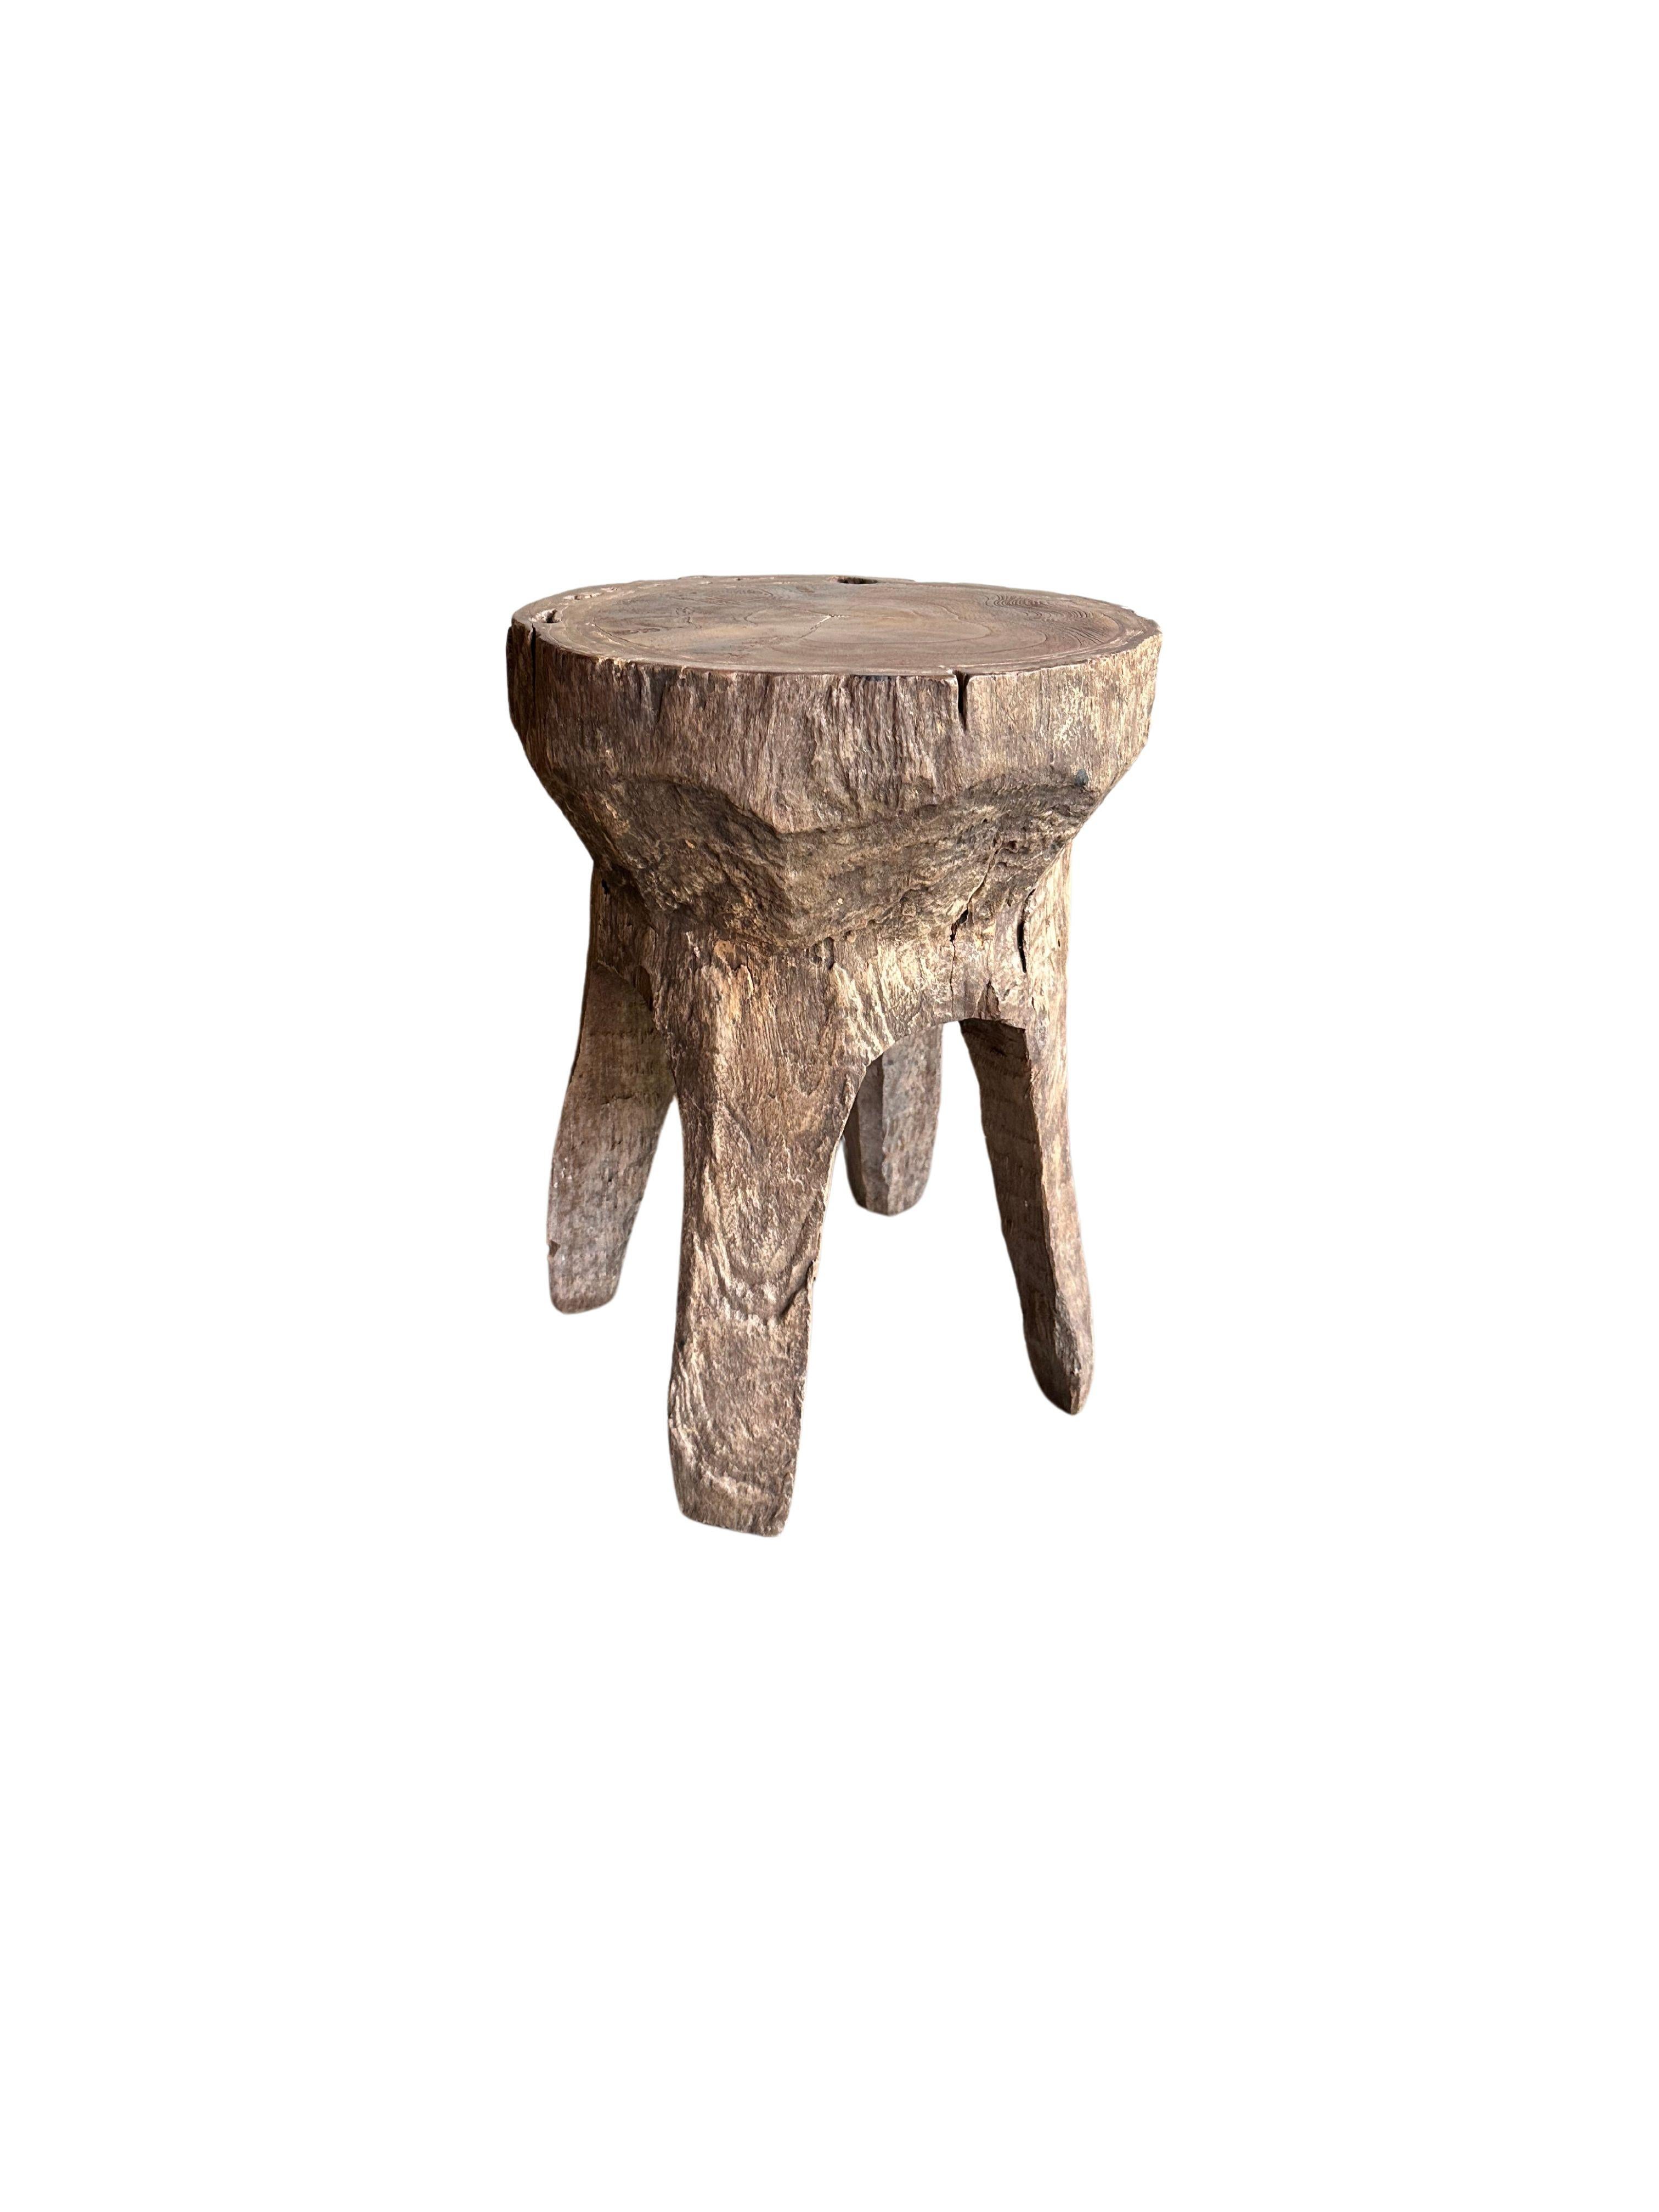 Hand-Crafted Antique Javanese Teak Wood Stool For Sale